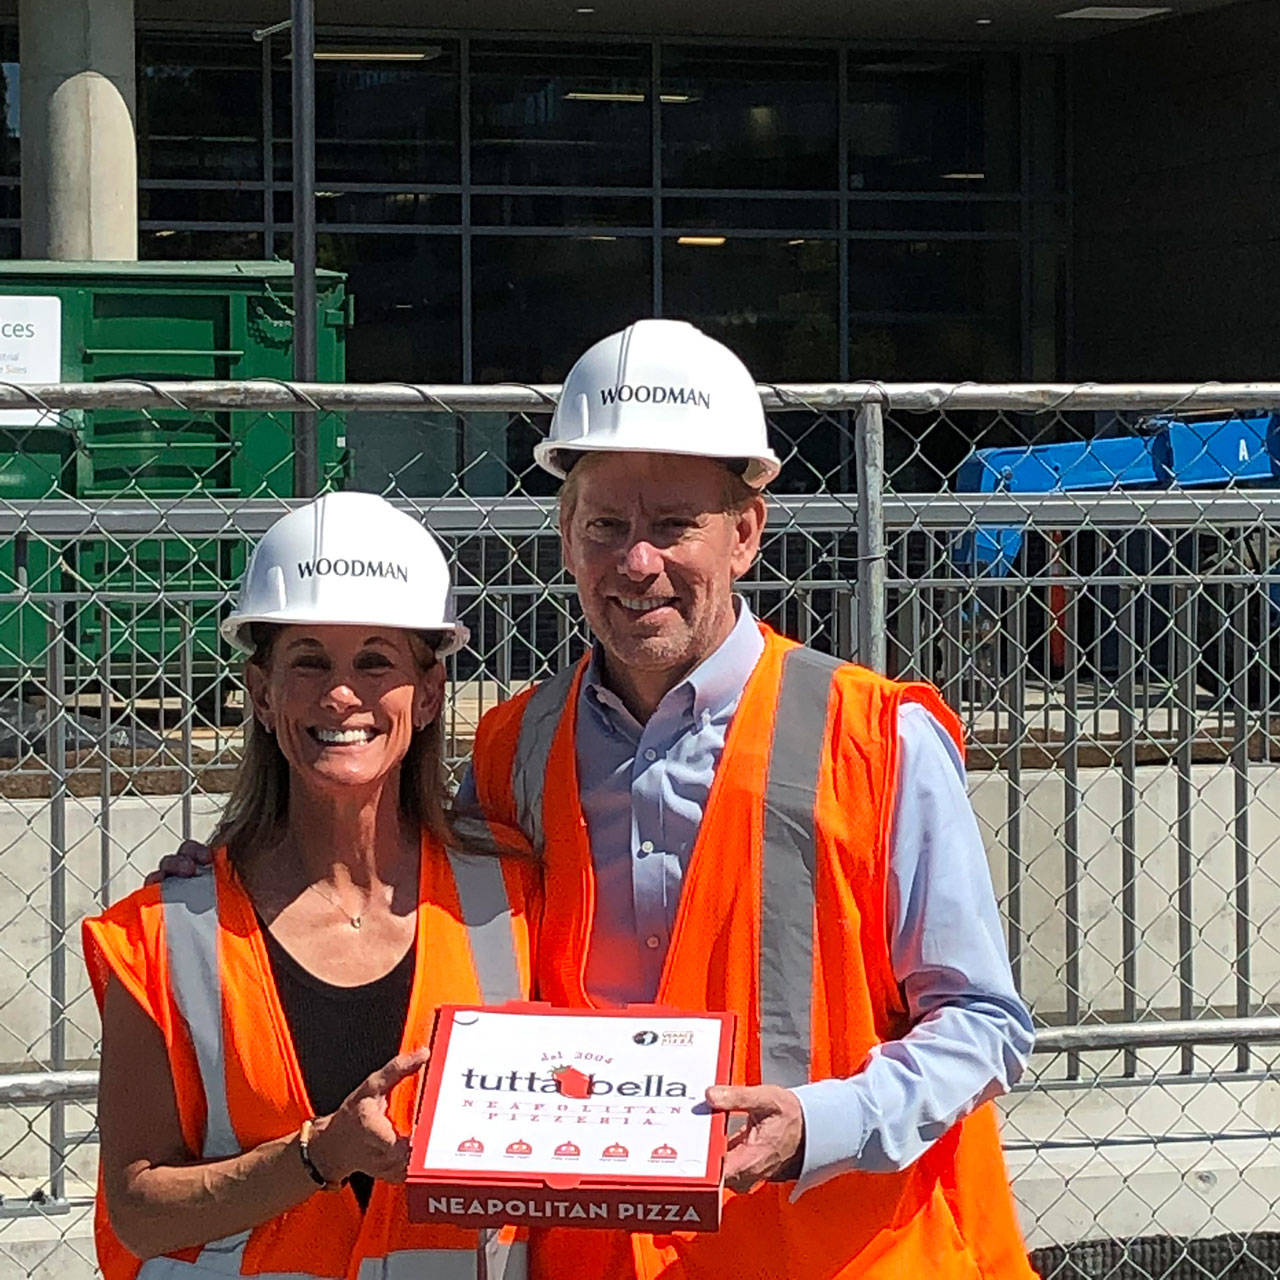 Suzy Monford, president of QFC (left), and Joe Fugere, owner of Tutta Bella (right) stand in front of the future Kirkland Urban location, holding a pizza box to commemorate the partnership. Photo courtesy of Tutta Bella Neapolitan Pizzeria